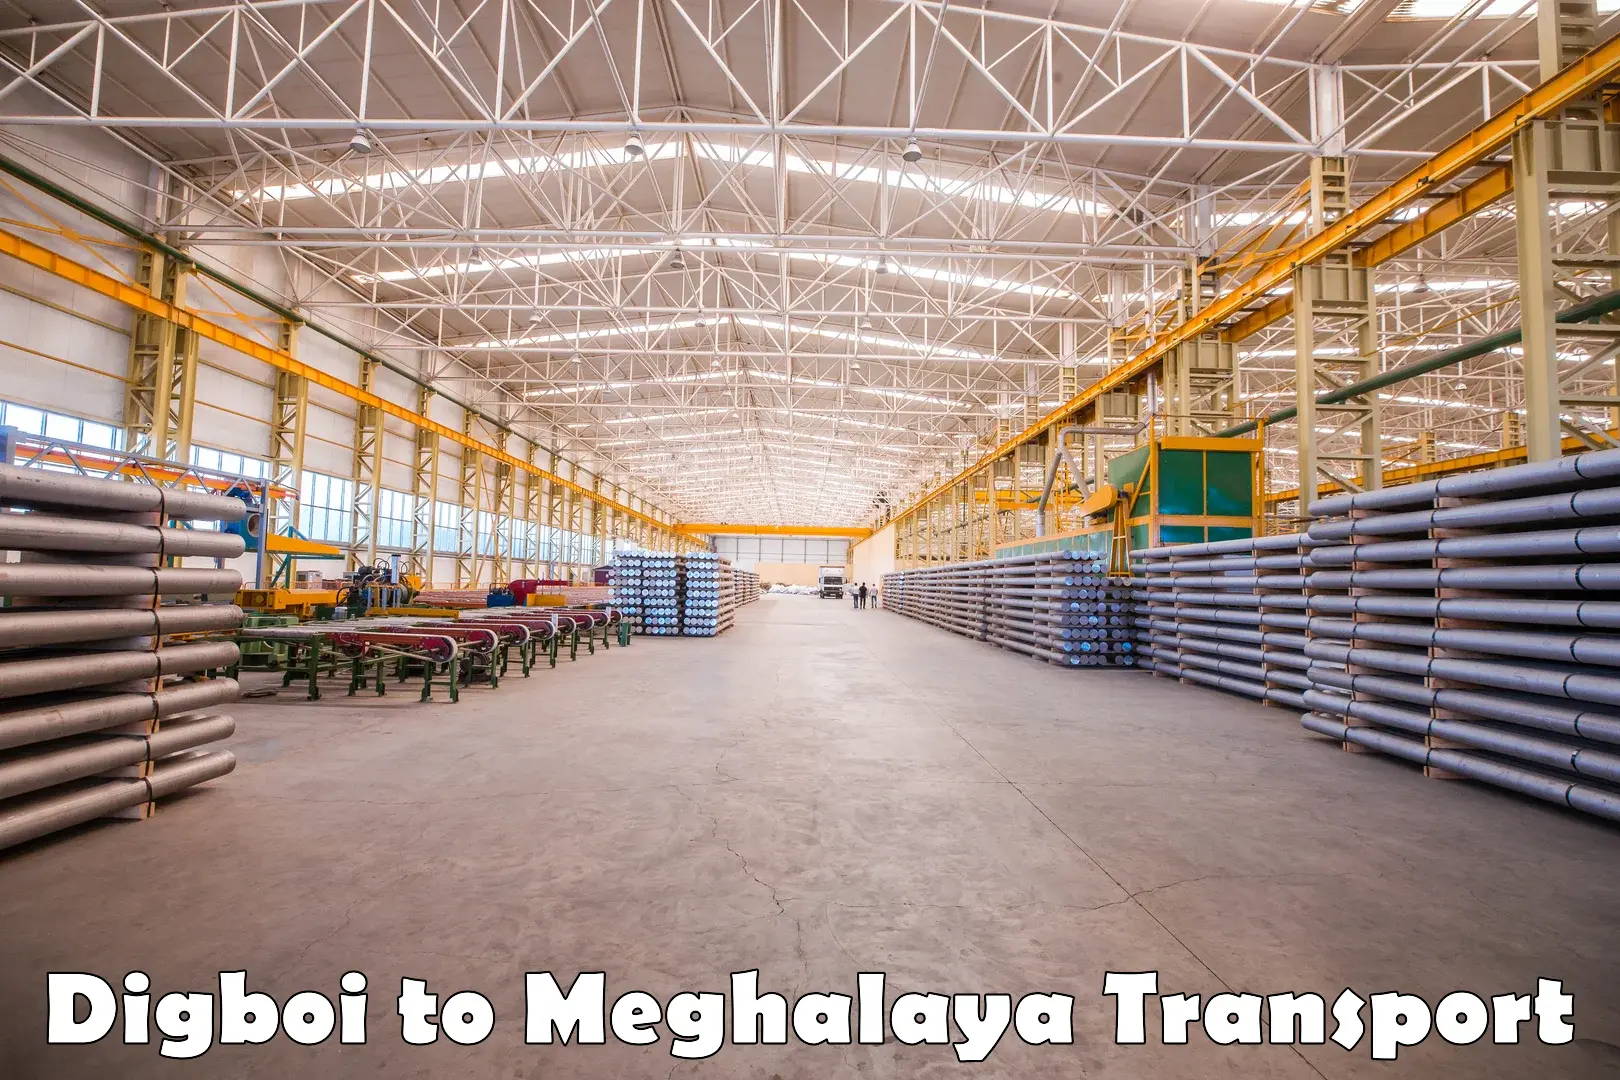 Delivery service Digboi to Meghalaya